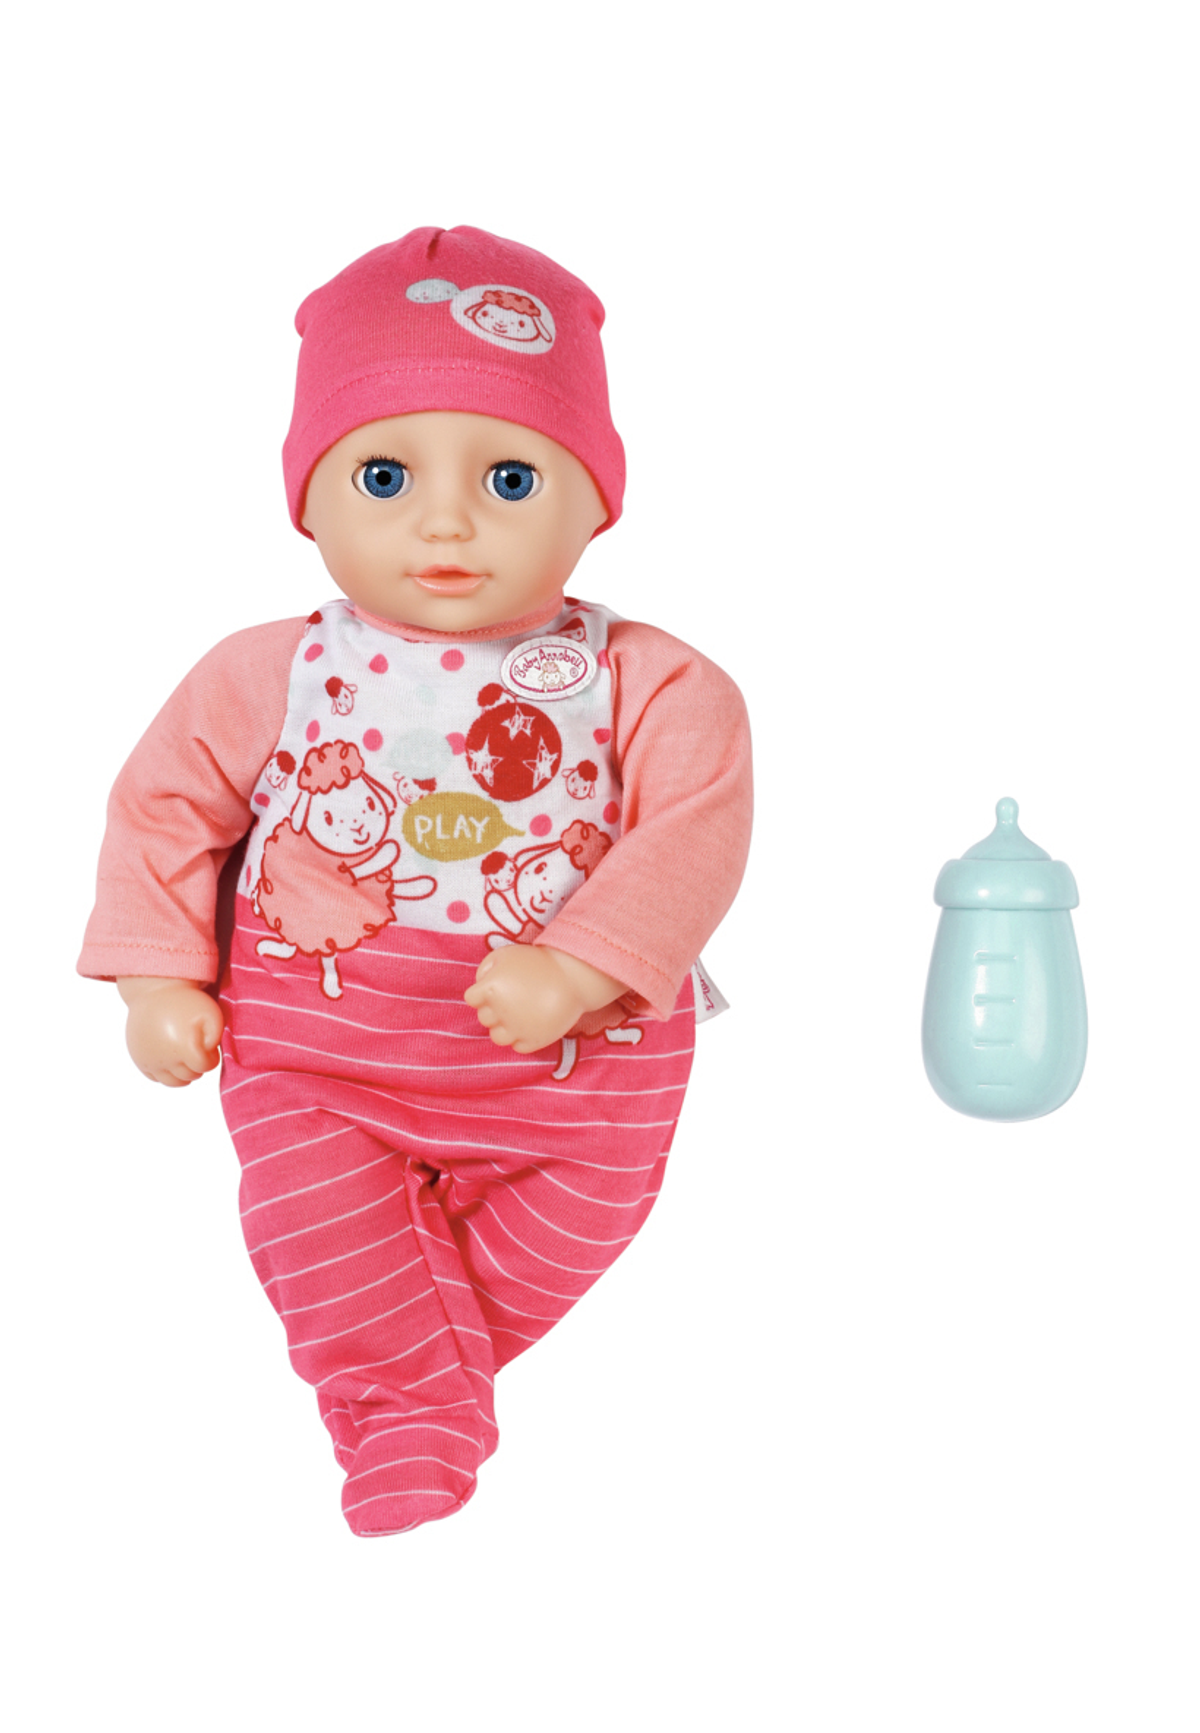 BABY ANNABELL 704073 Puppen Mehrfarbig